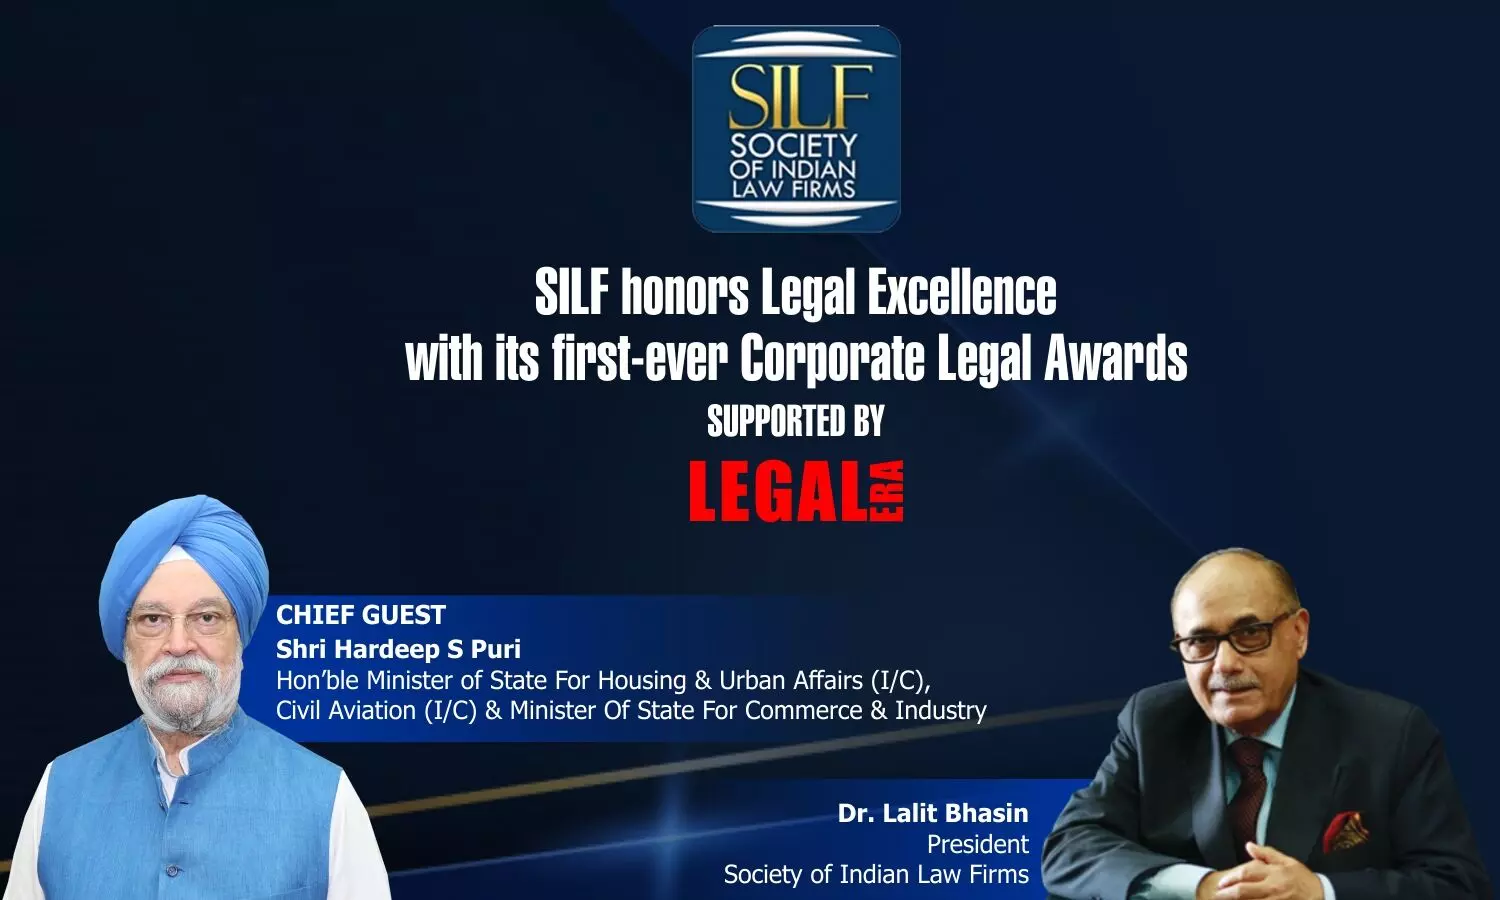 Legal Era supports SILFs first-ever Corporate Legal Awards Event